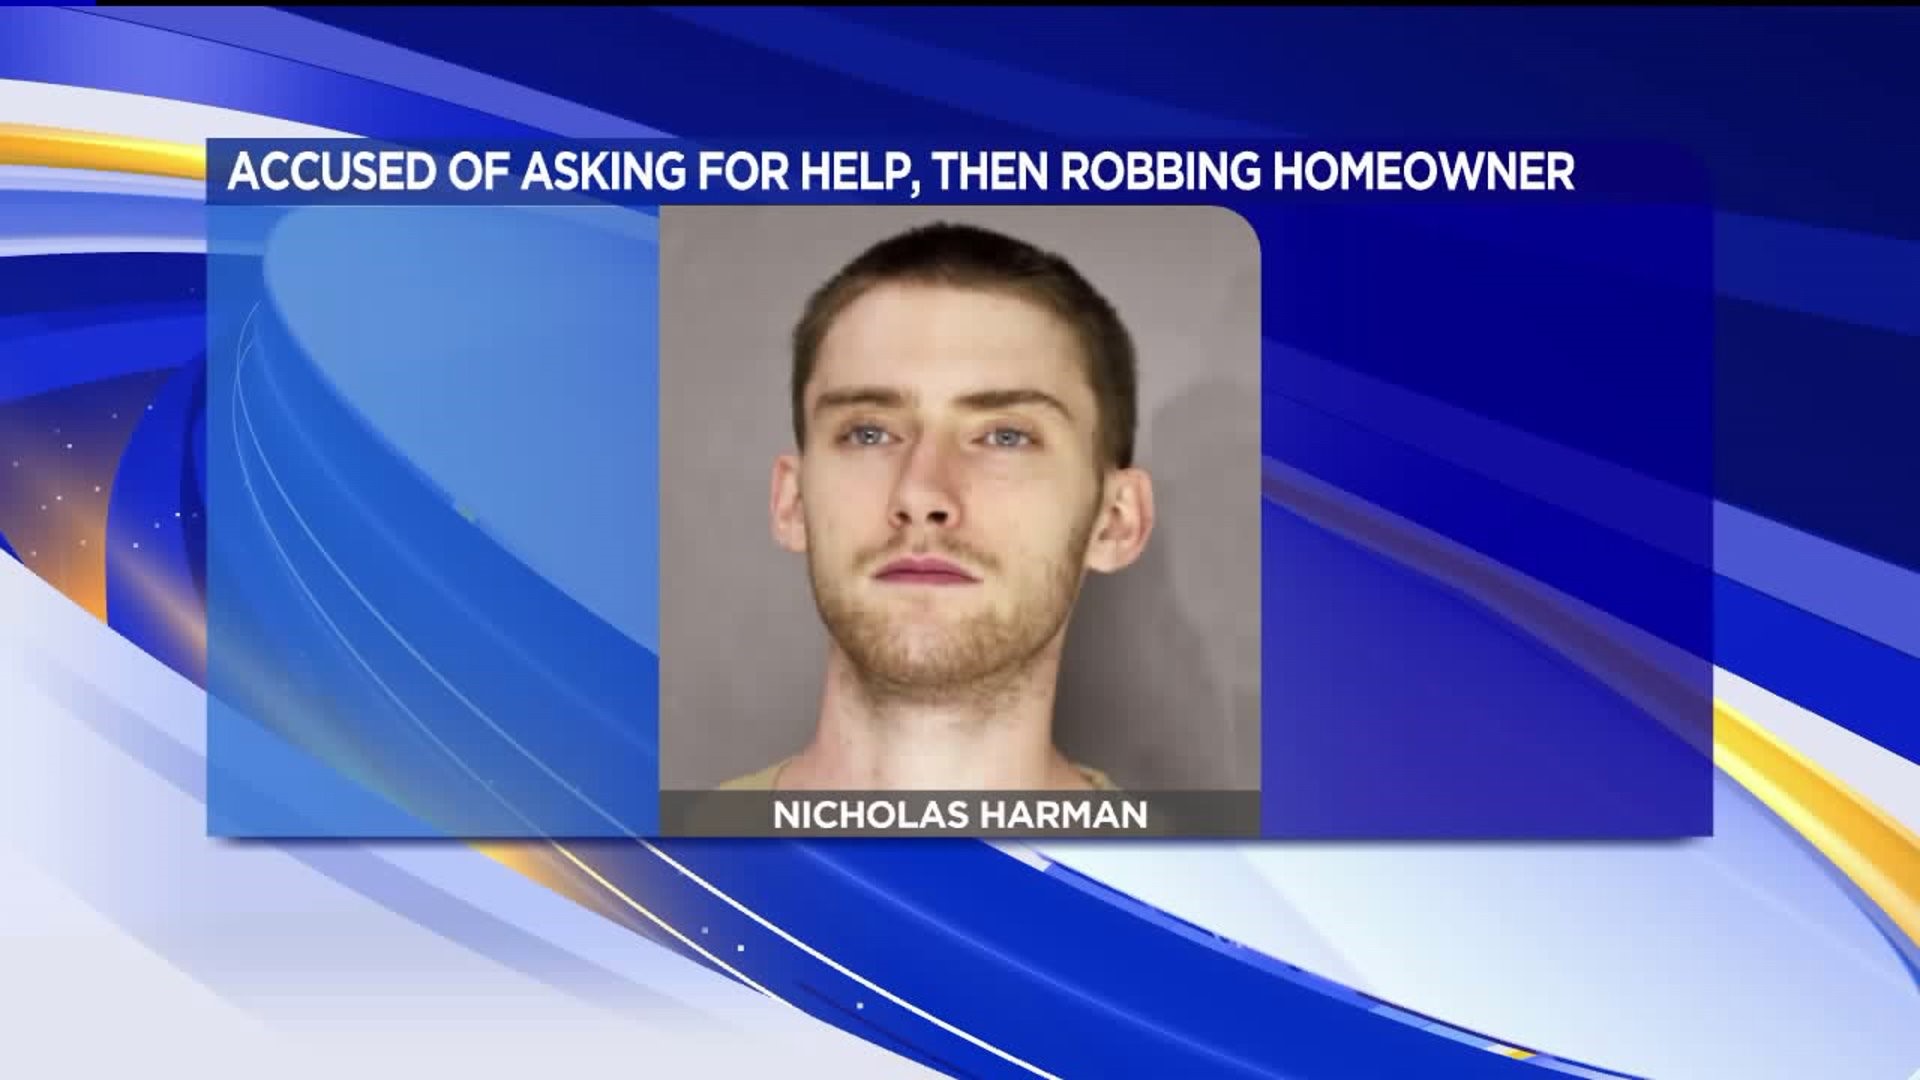 Man Accused of Asking Elderly Homeowner for Help, Then Stealing Money and His Vehicle